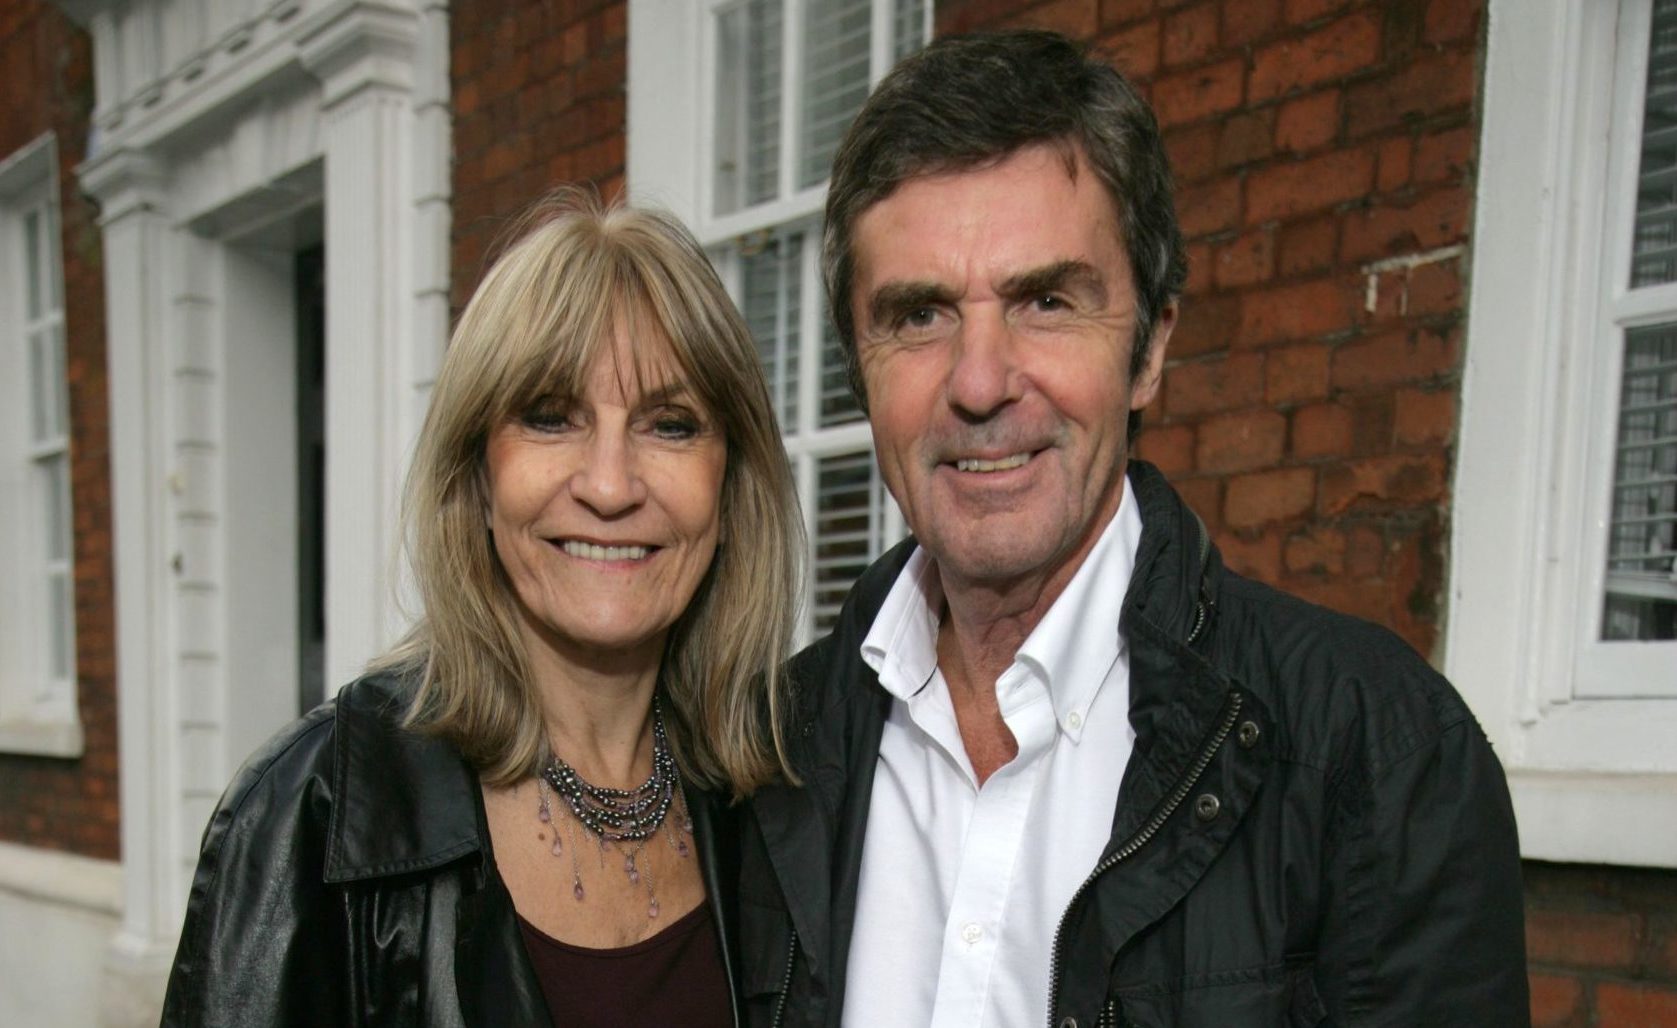 John Stapleton with Lynn Faulds Wood during a visit to the Henley Literary Festival, Oxfordshire, in 2012